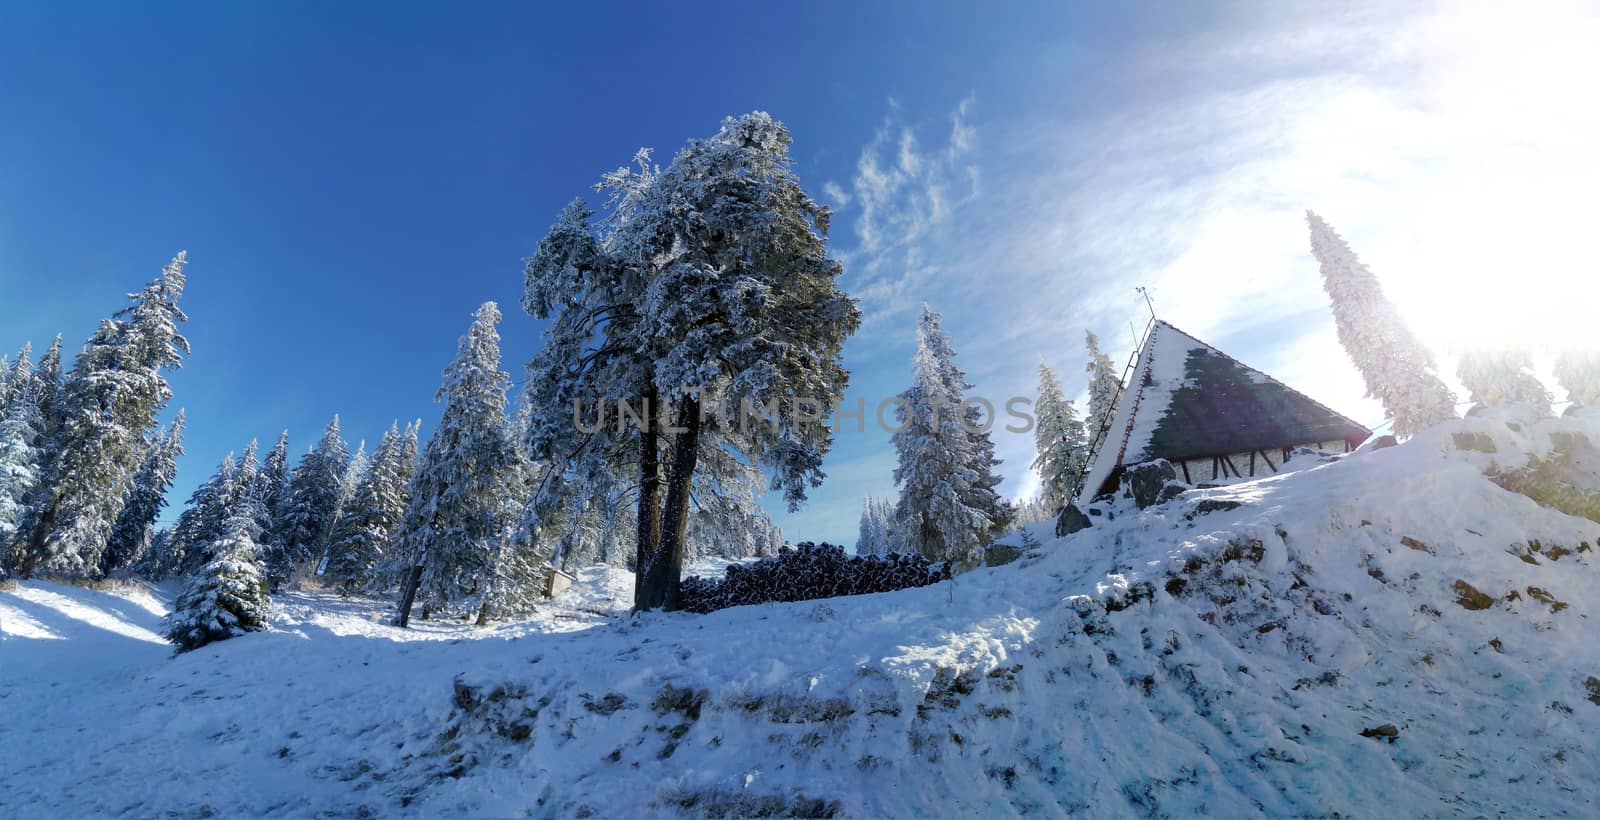 Sunny winter landscape with pines covered in snow and a traditional chalet.